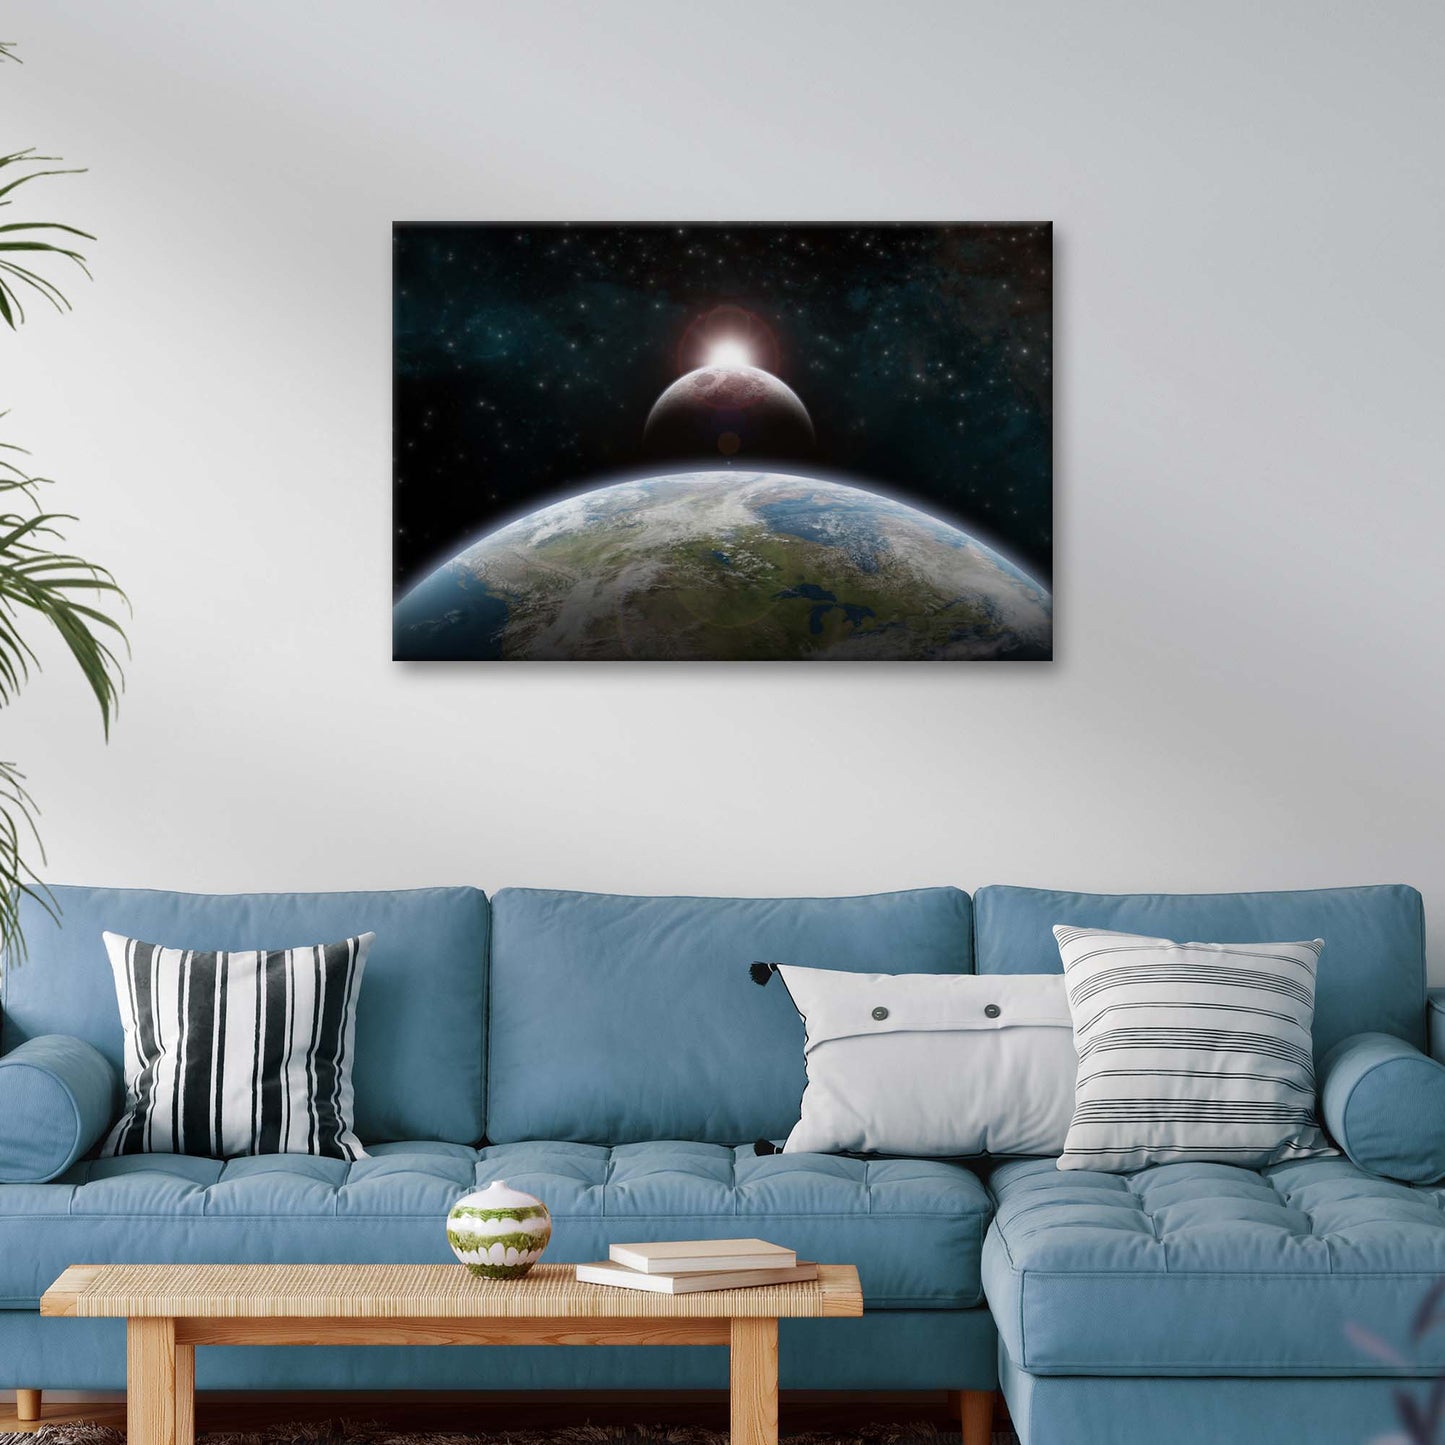 Planet Earth Over Moon Canvas Wall Art - Image by Tailored Canvases